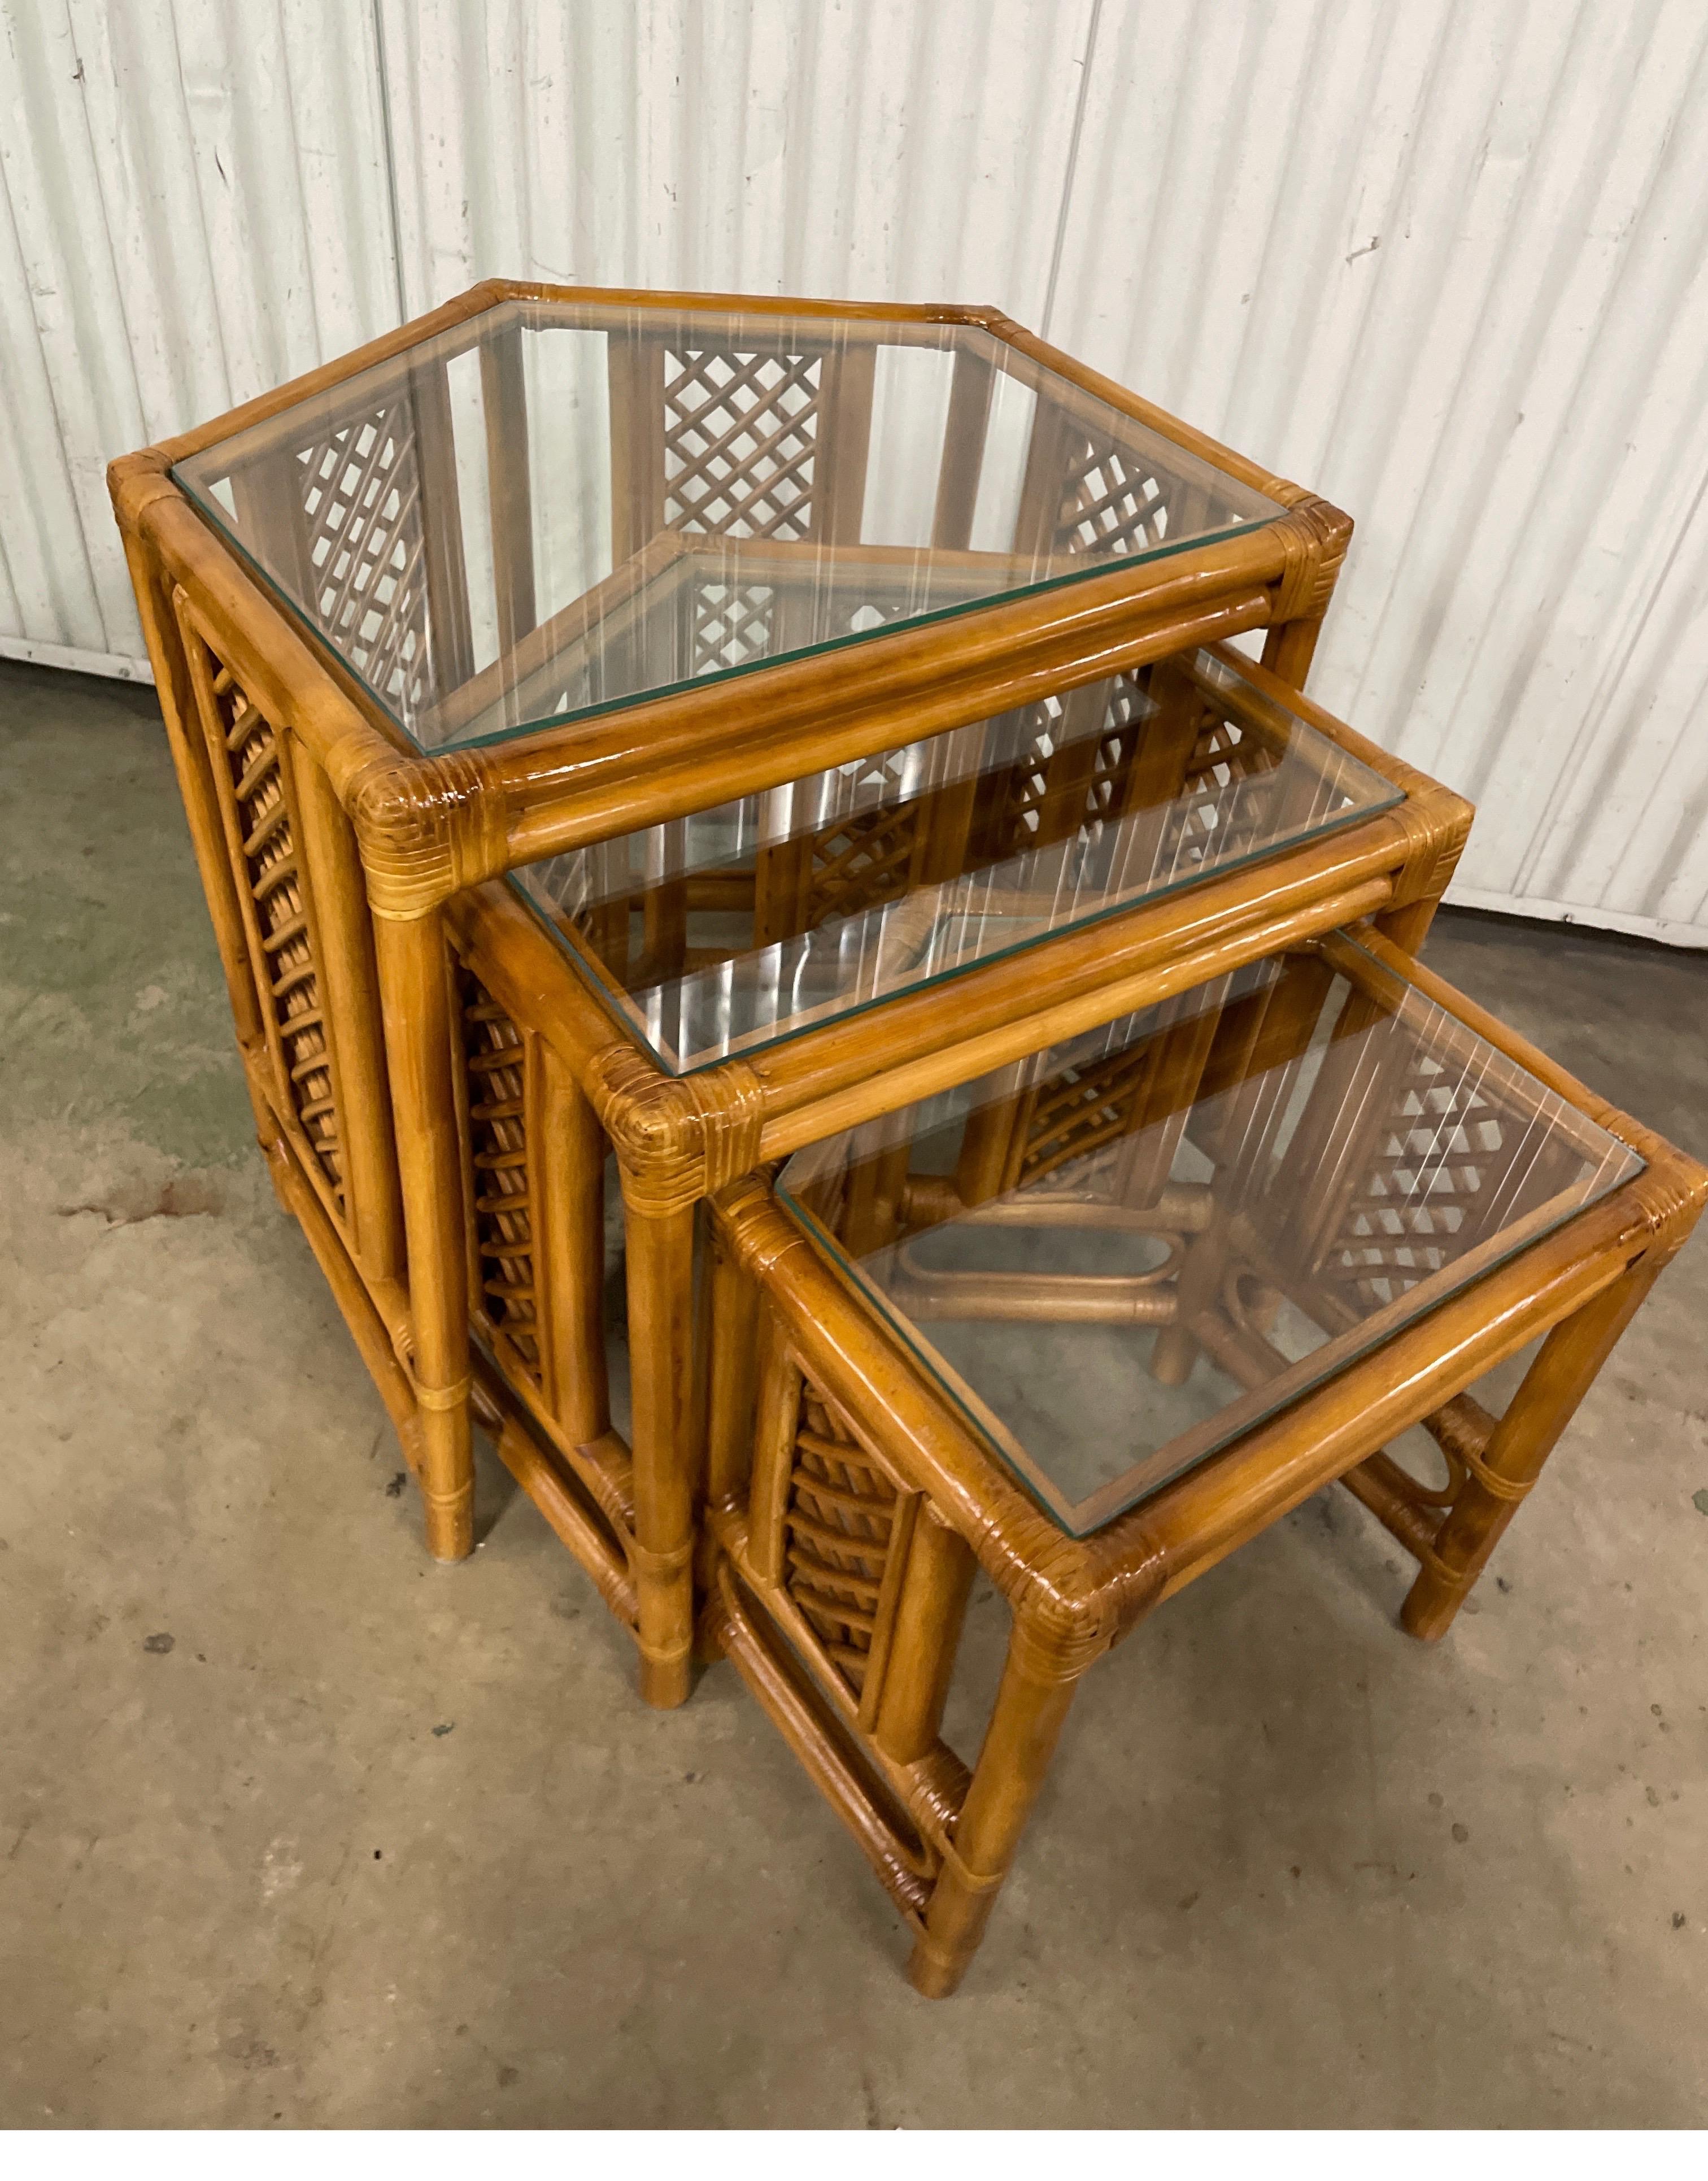 Vintage mid-century set of bamboo nesting tables with glass tops.